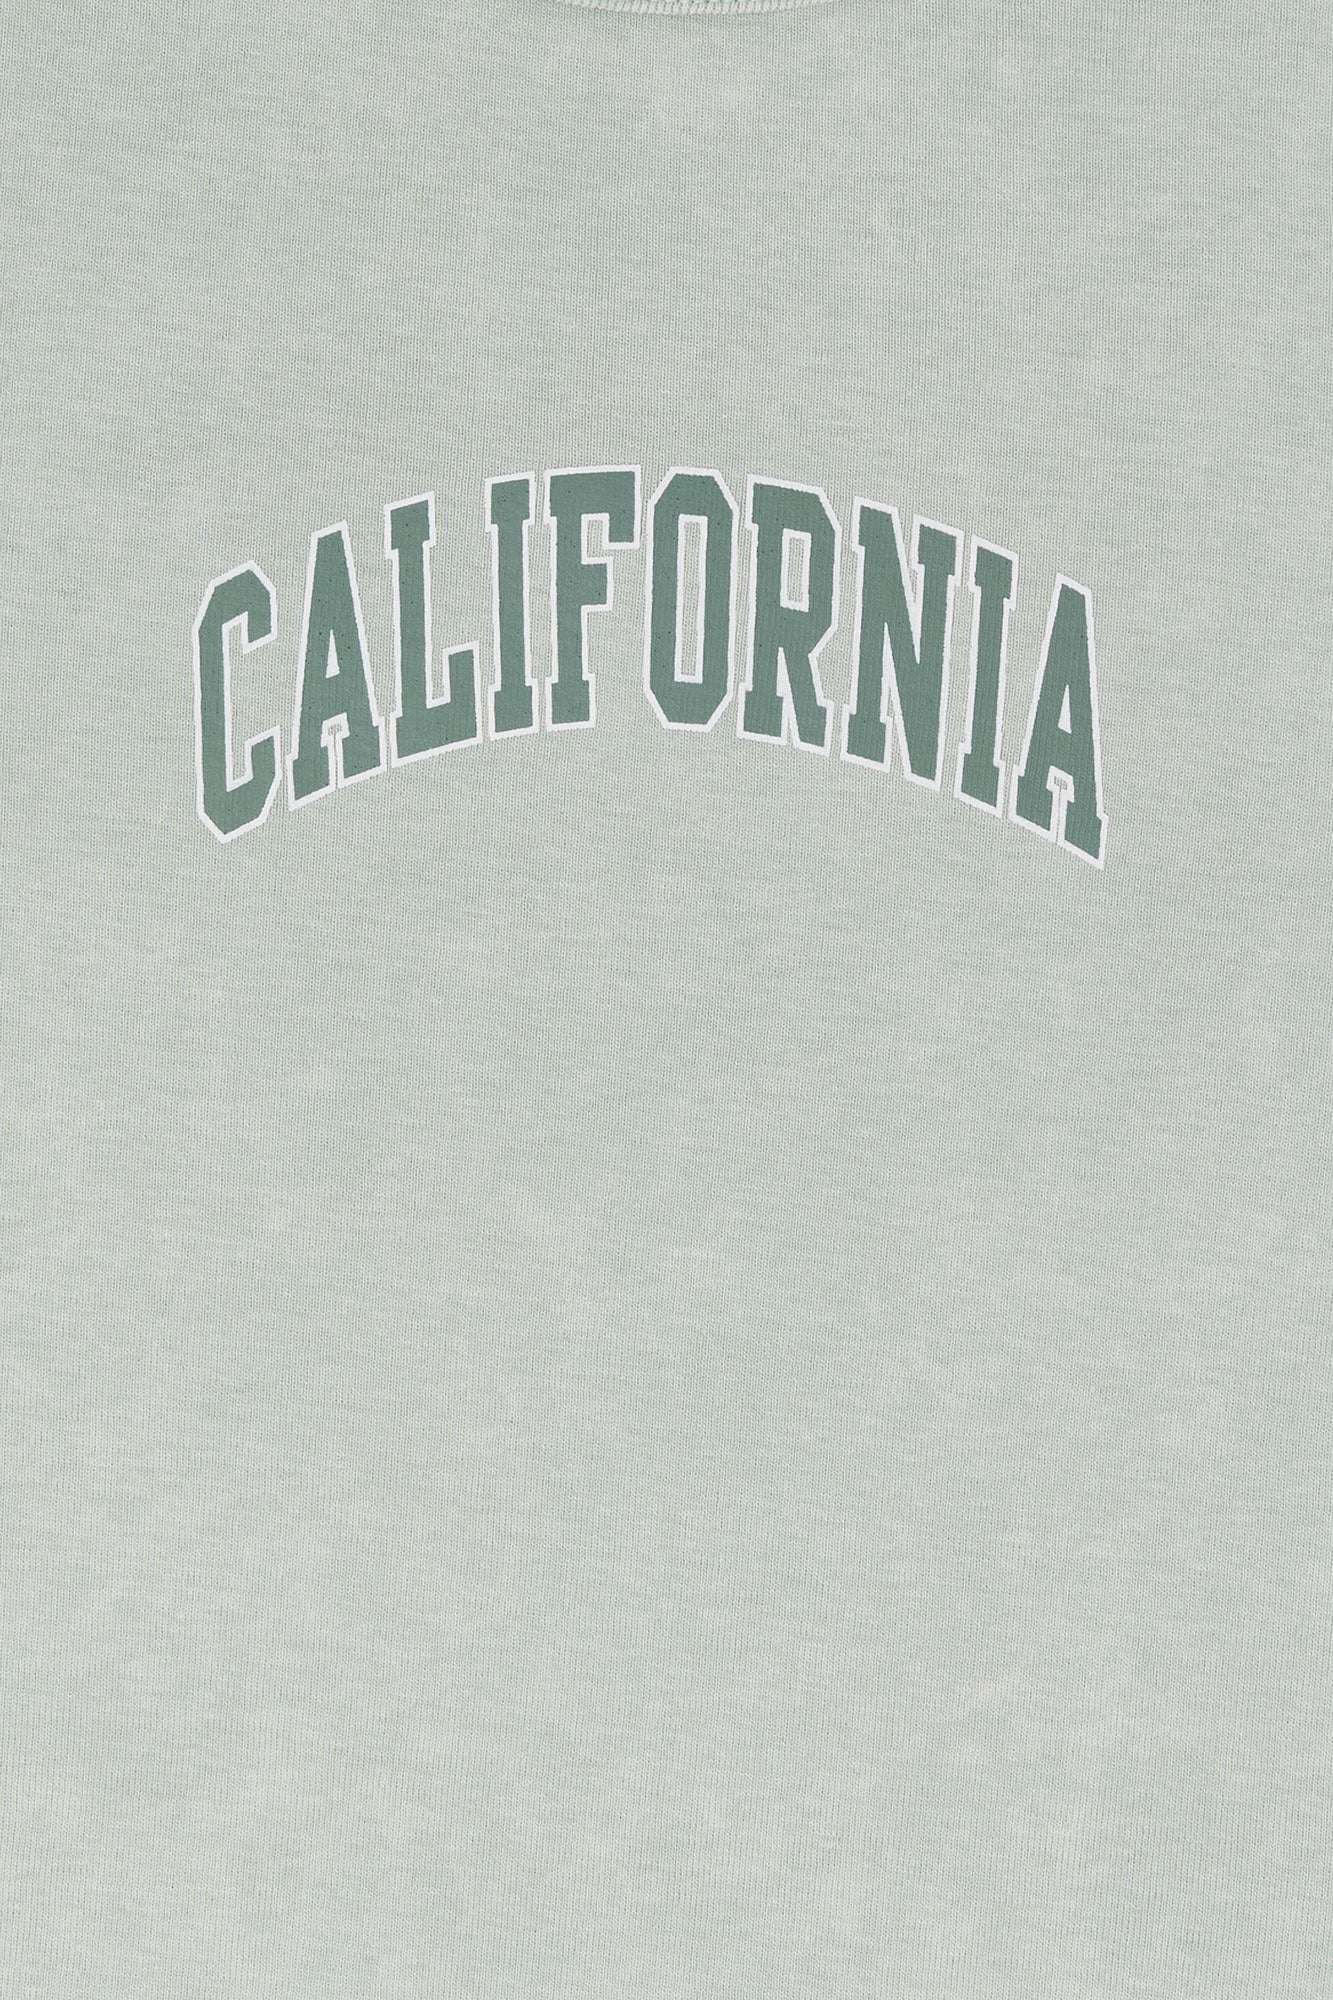 California Graphic Cropped T-Shirt